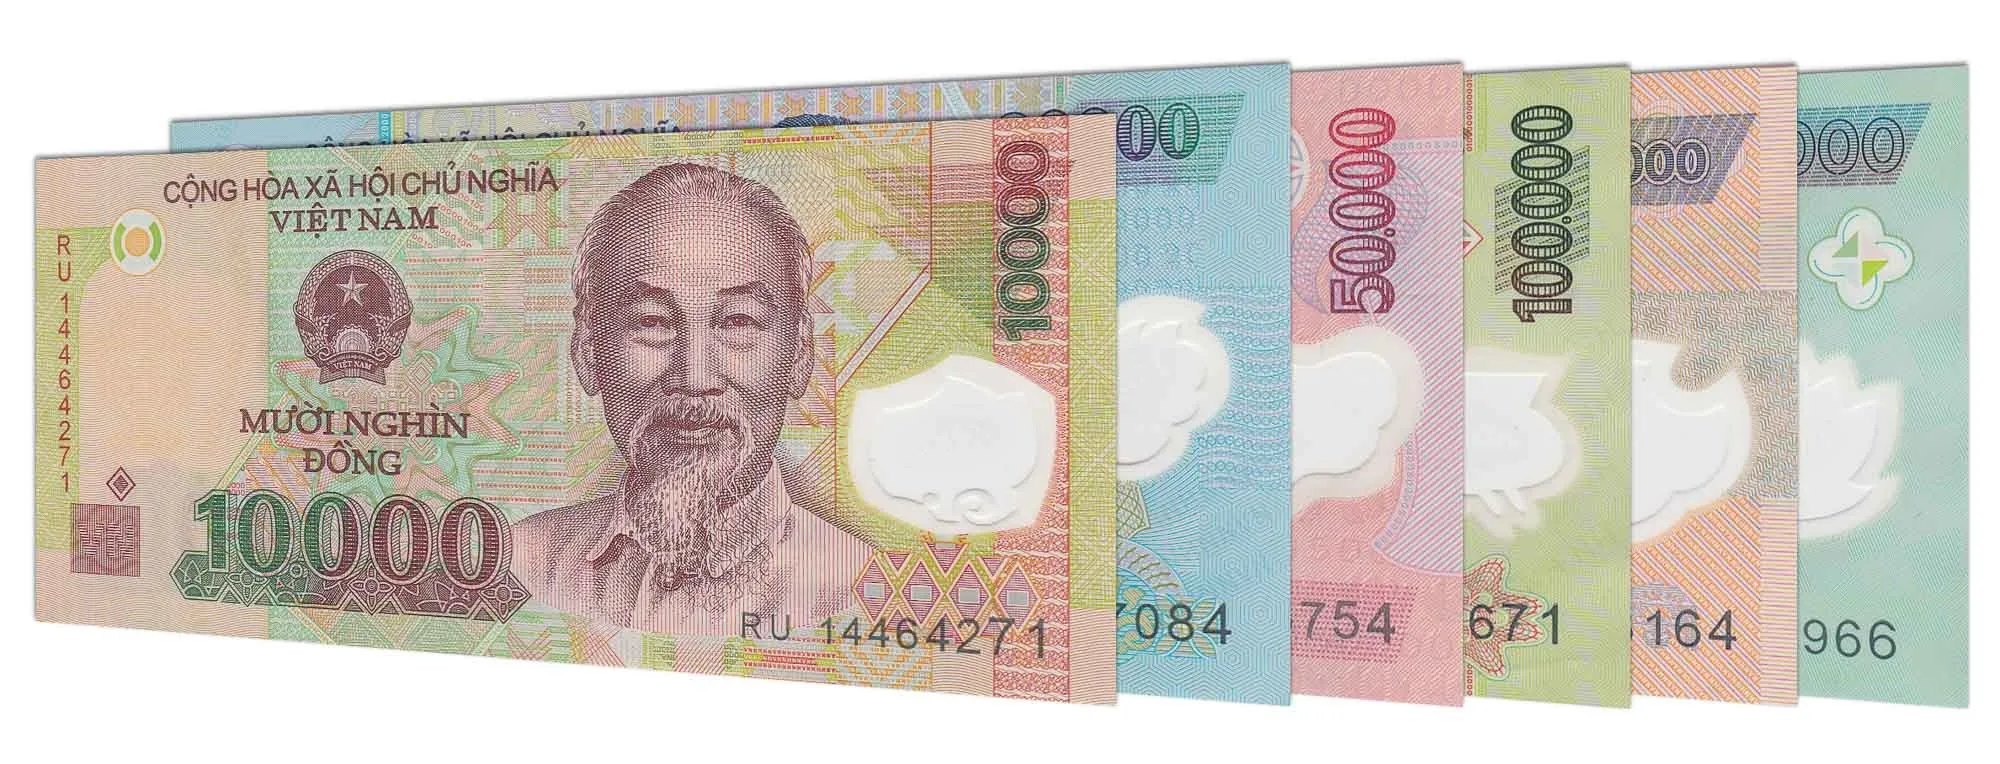 Vietnamese currency denominations with polymer coins